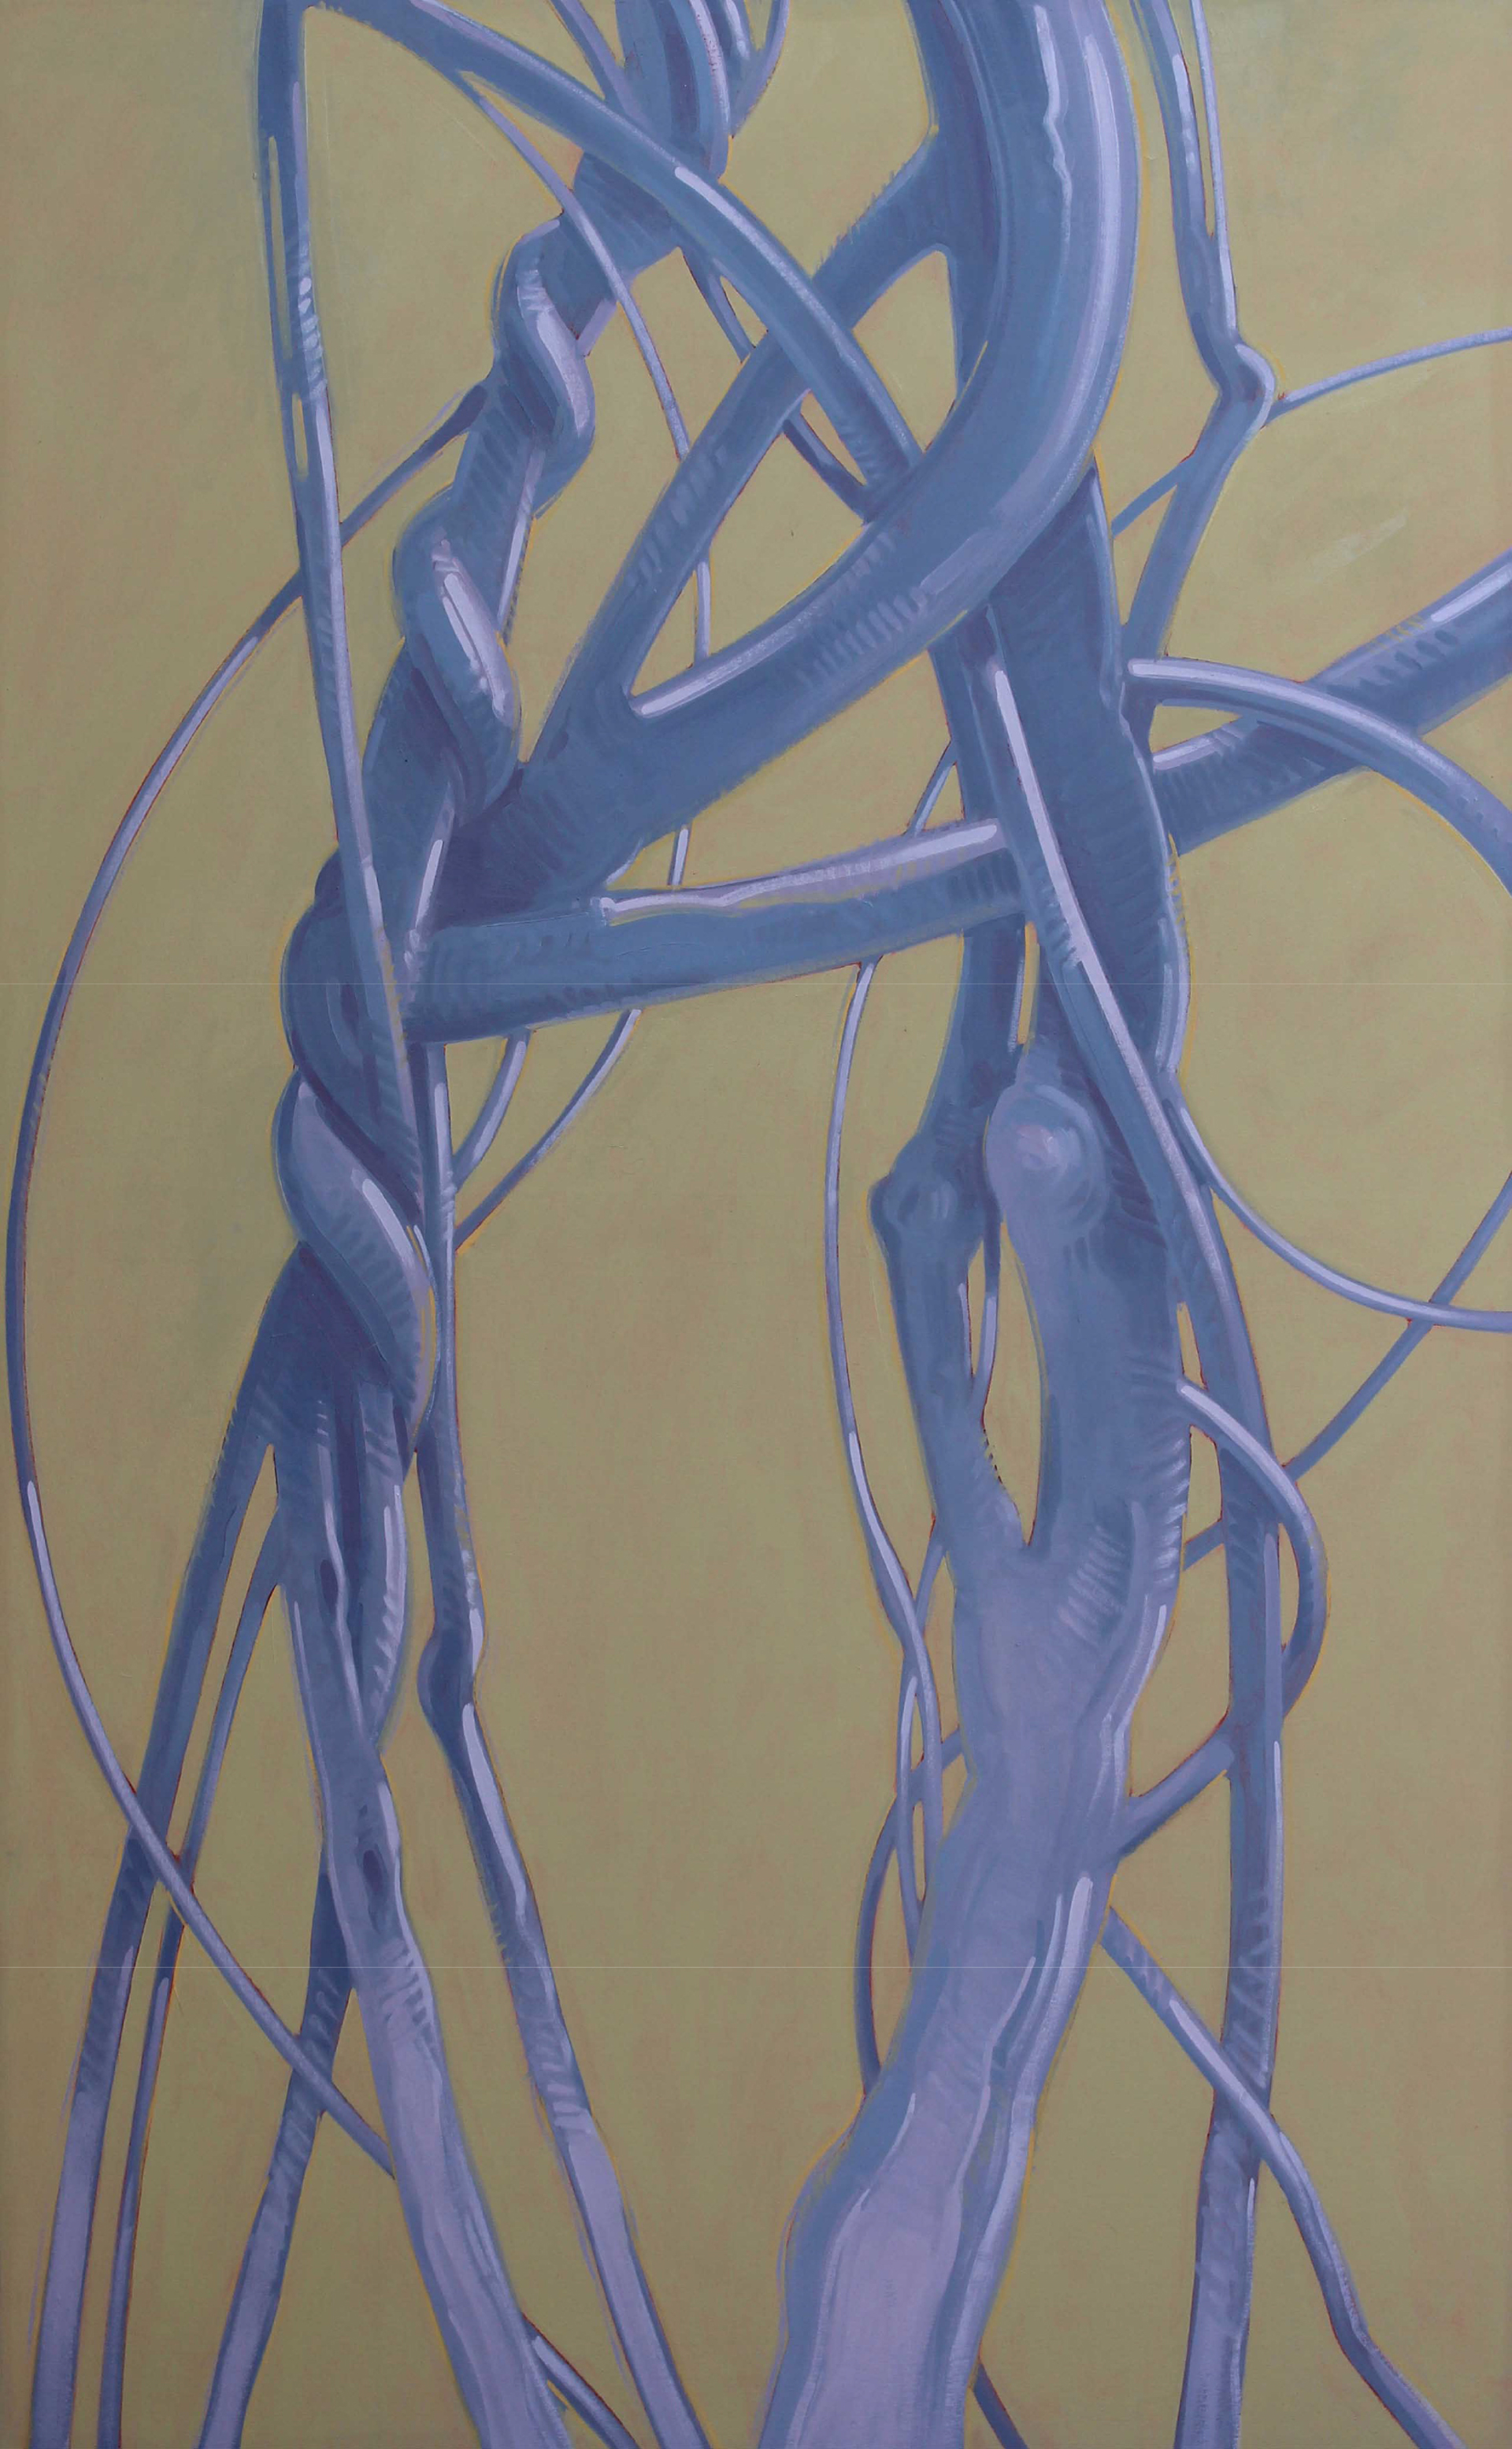 Vines # 6 by George Martin